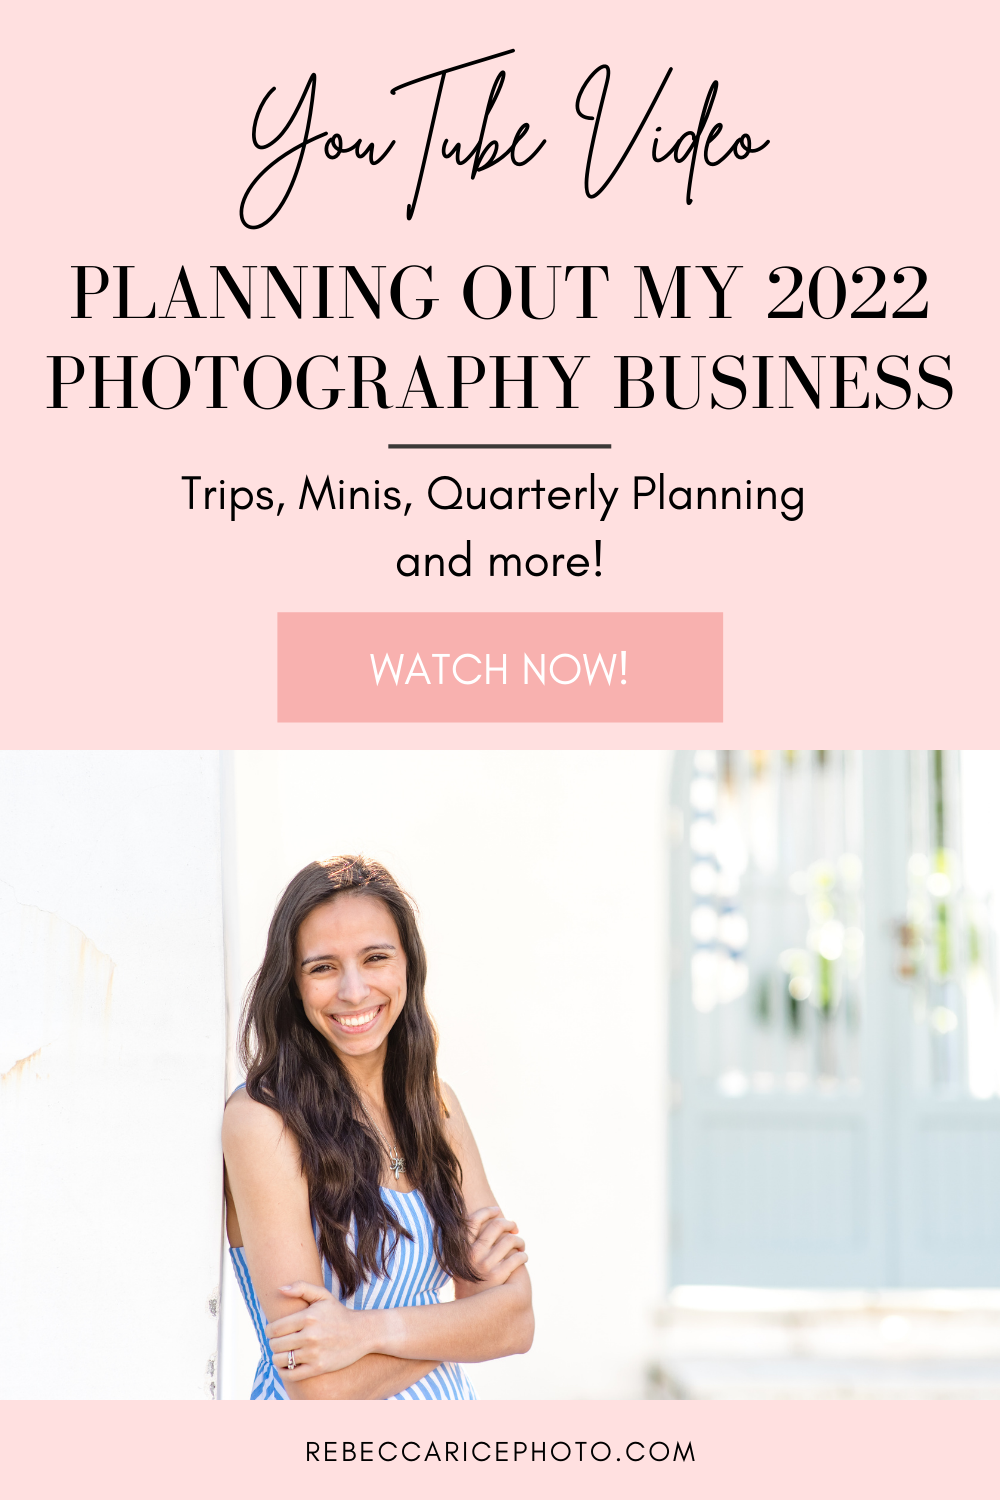 Planning out my 2022 Photography Business | Business Planning Tips